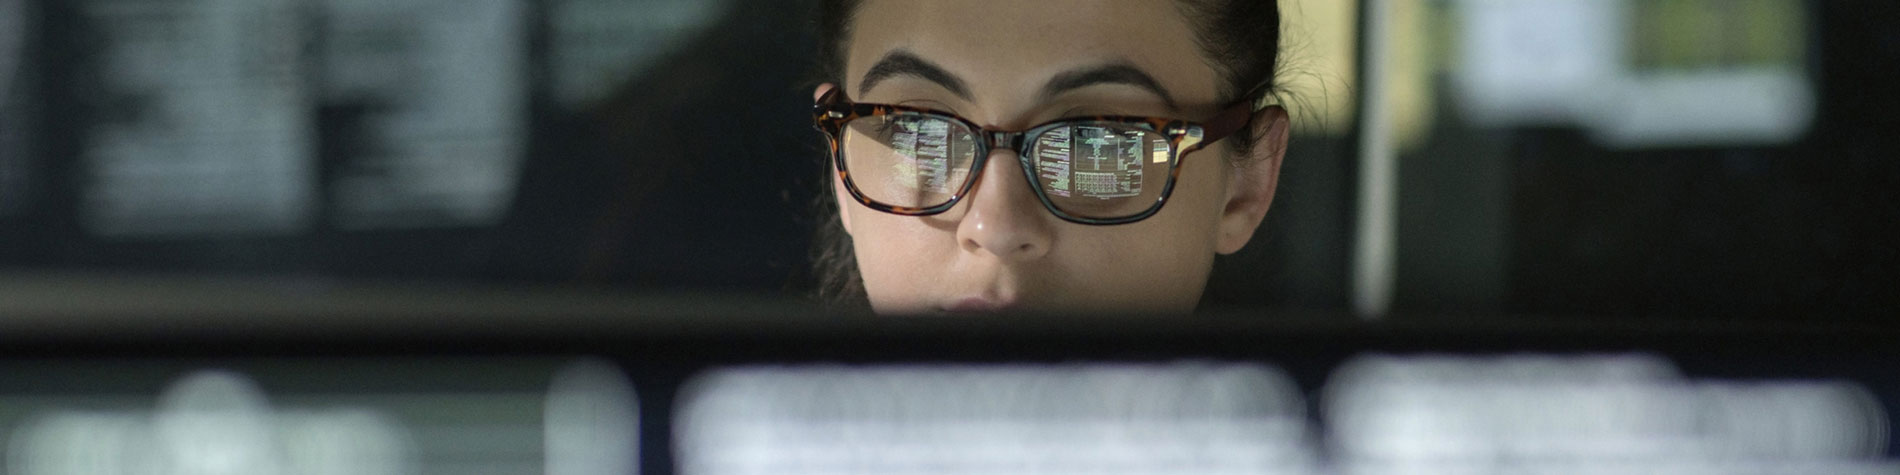 A close up of a woman with a computer screen reflected in her glasses